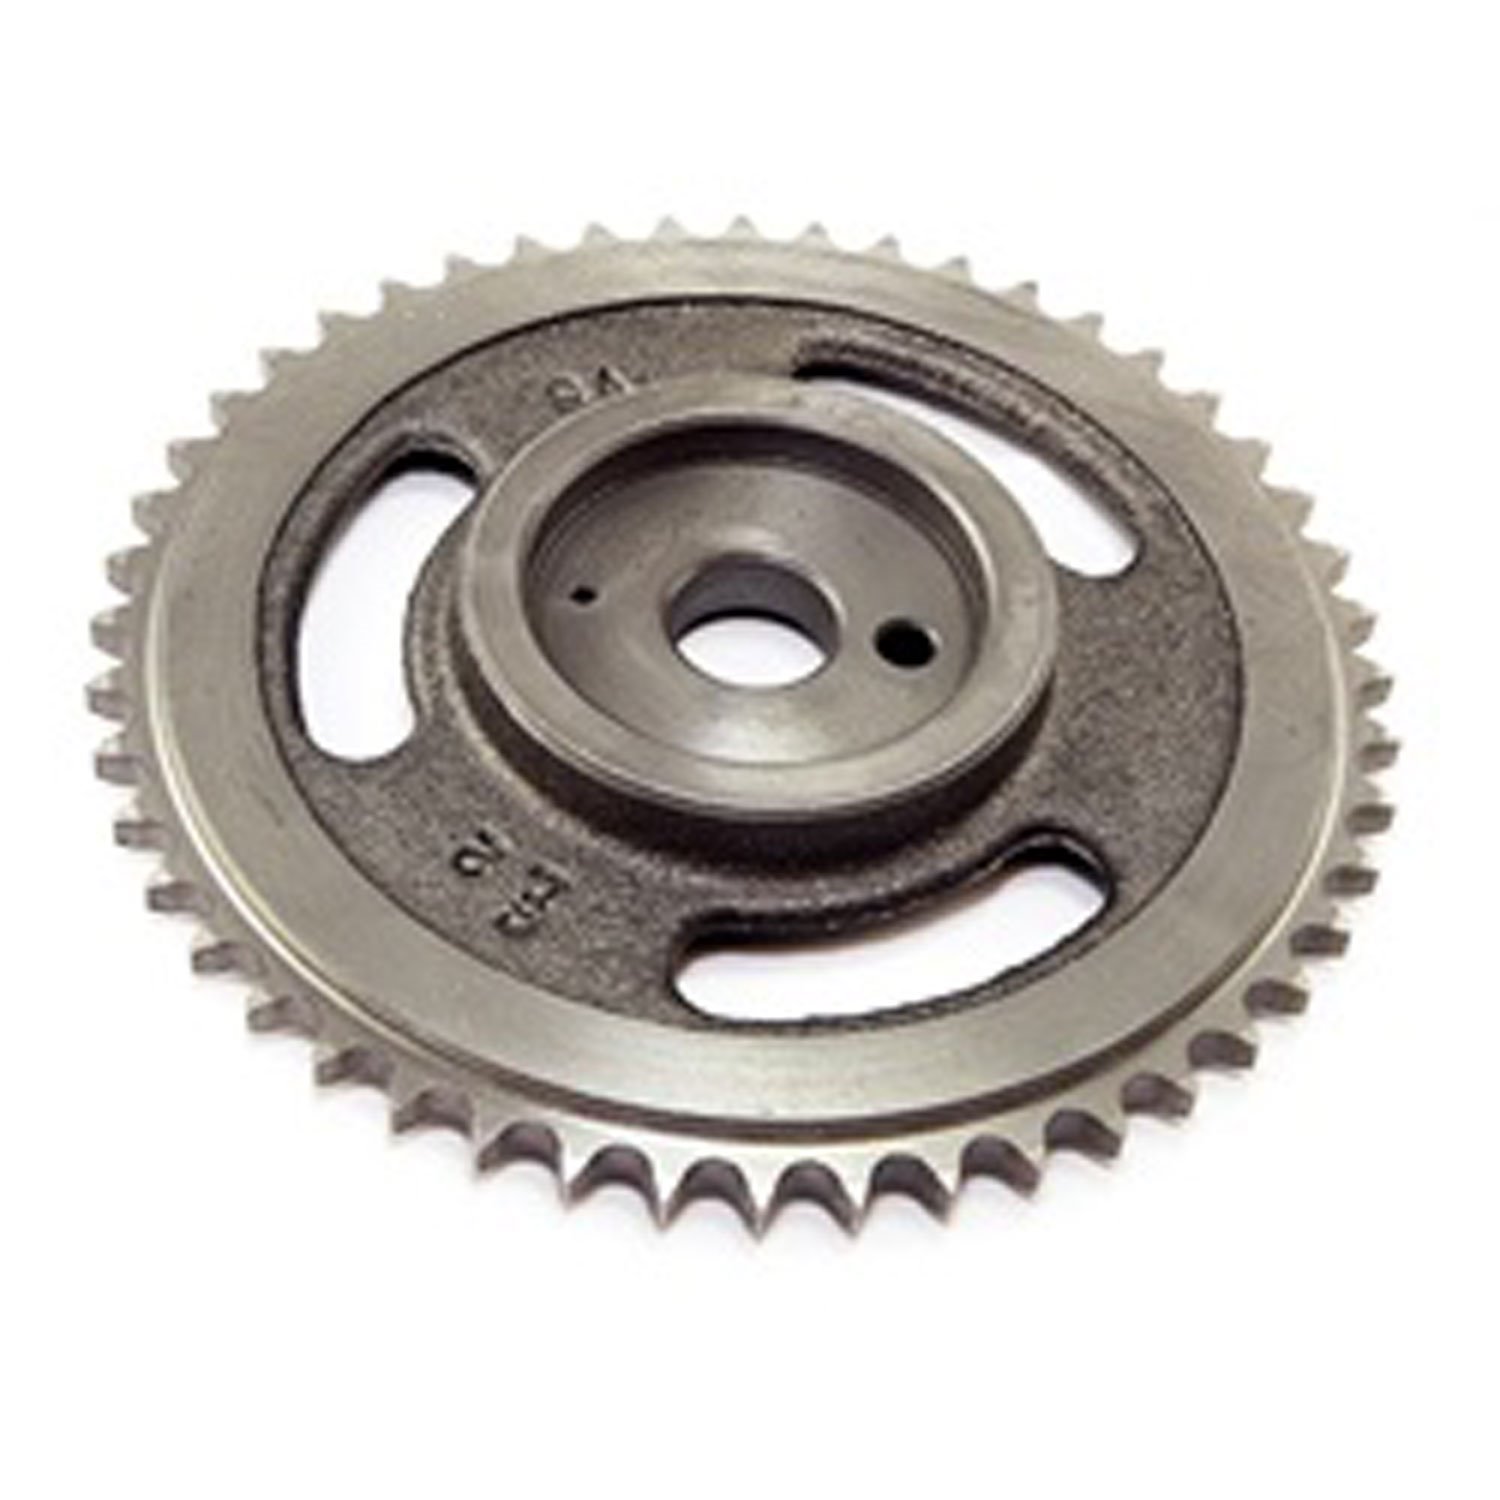 Camshaft Sprocket 2.5L 1983-2002 Jeep CJ and Wrangler By Omix-ADA